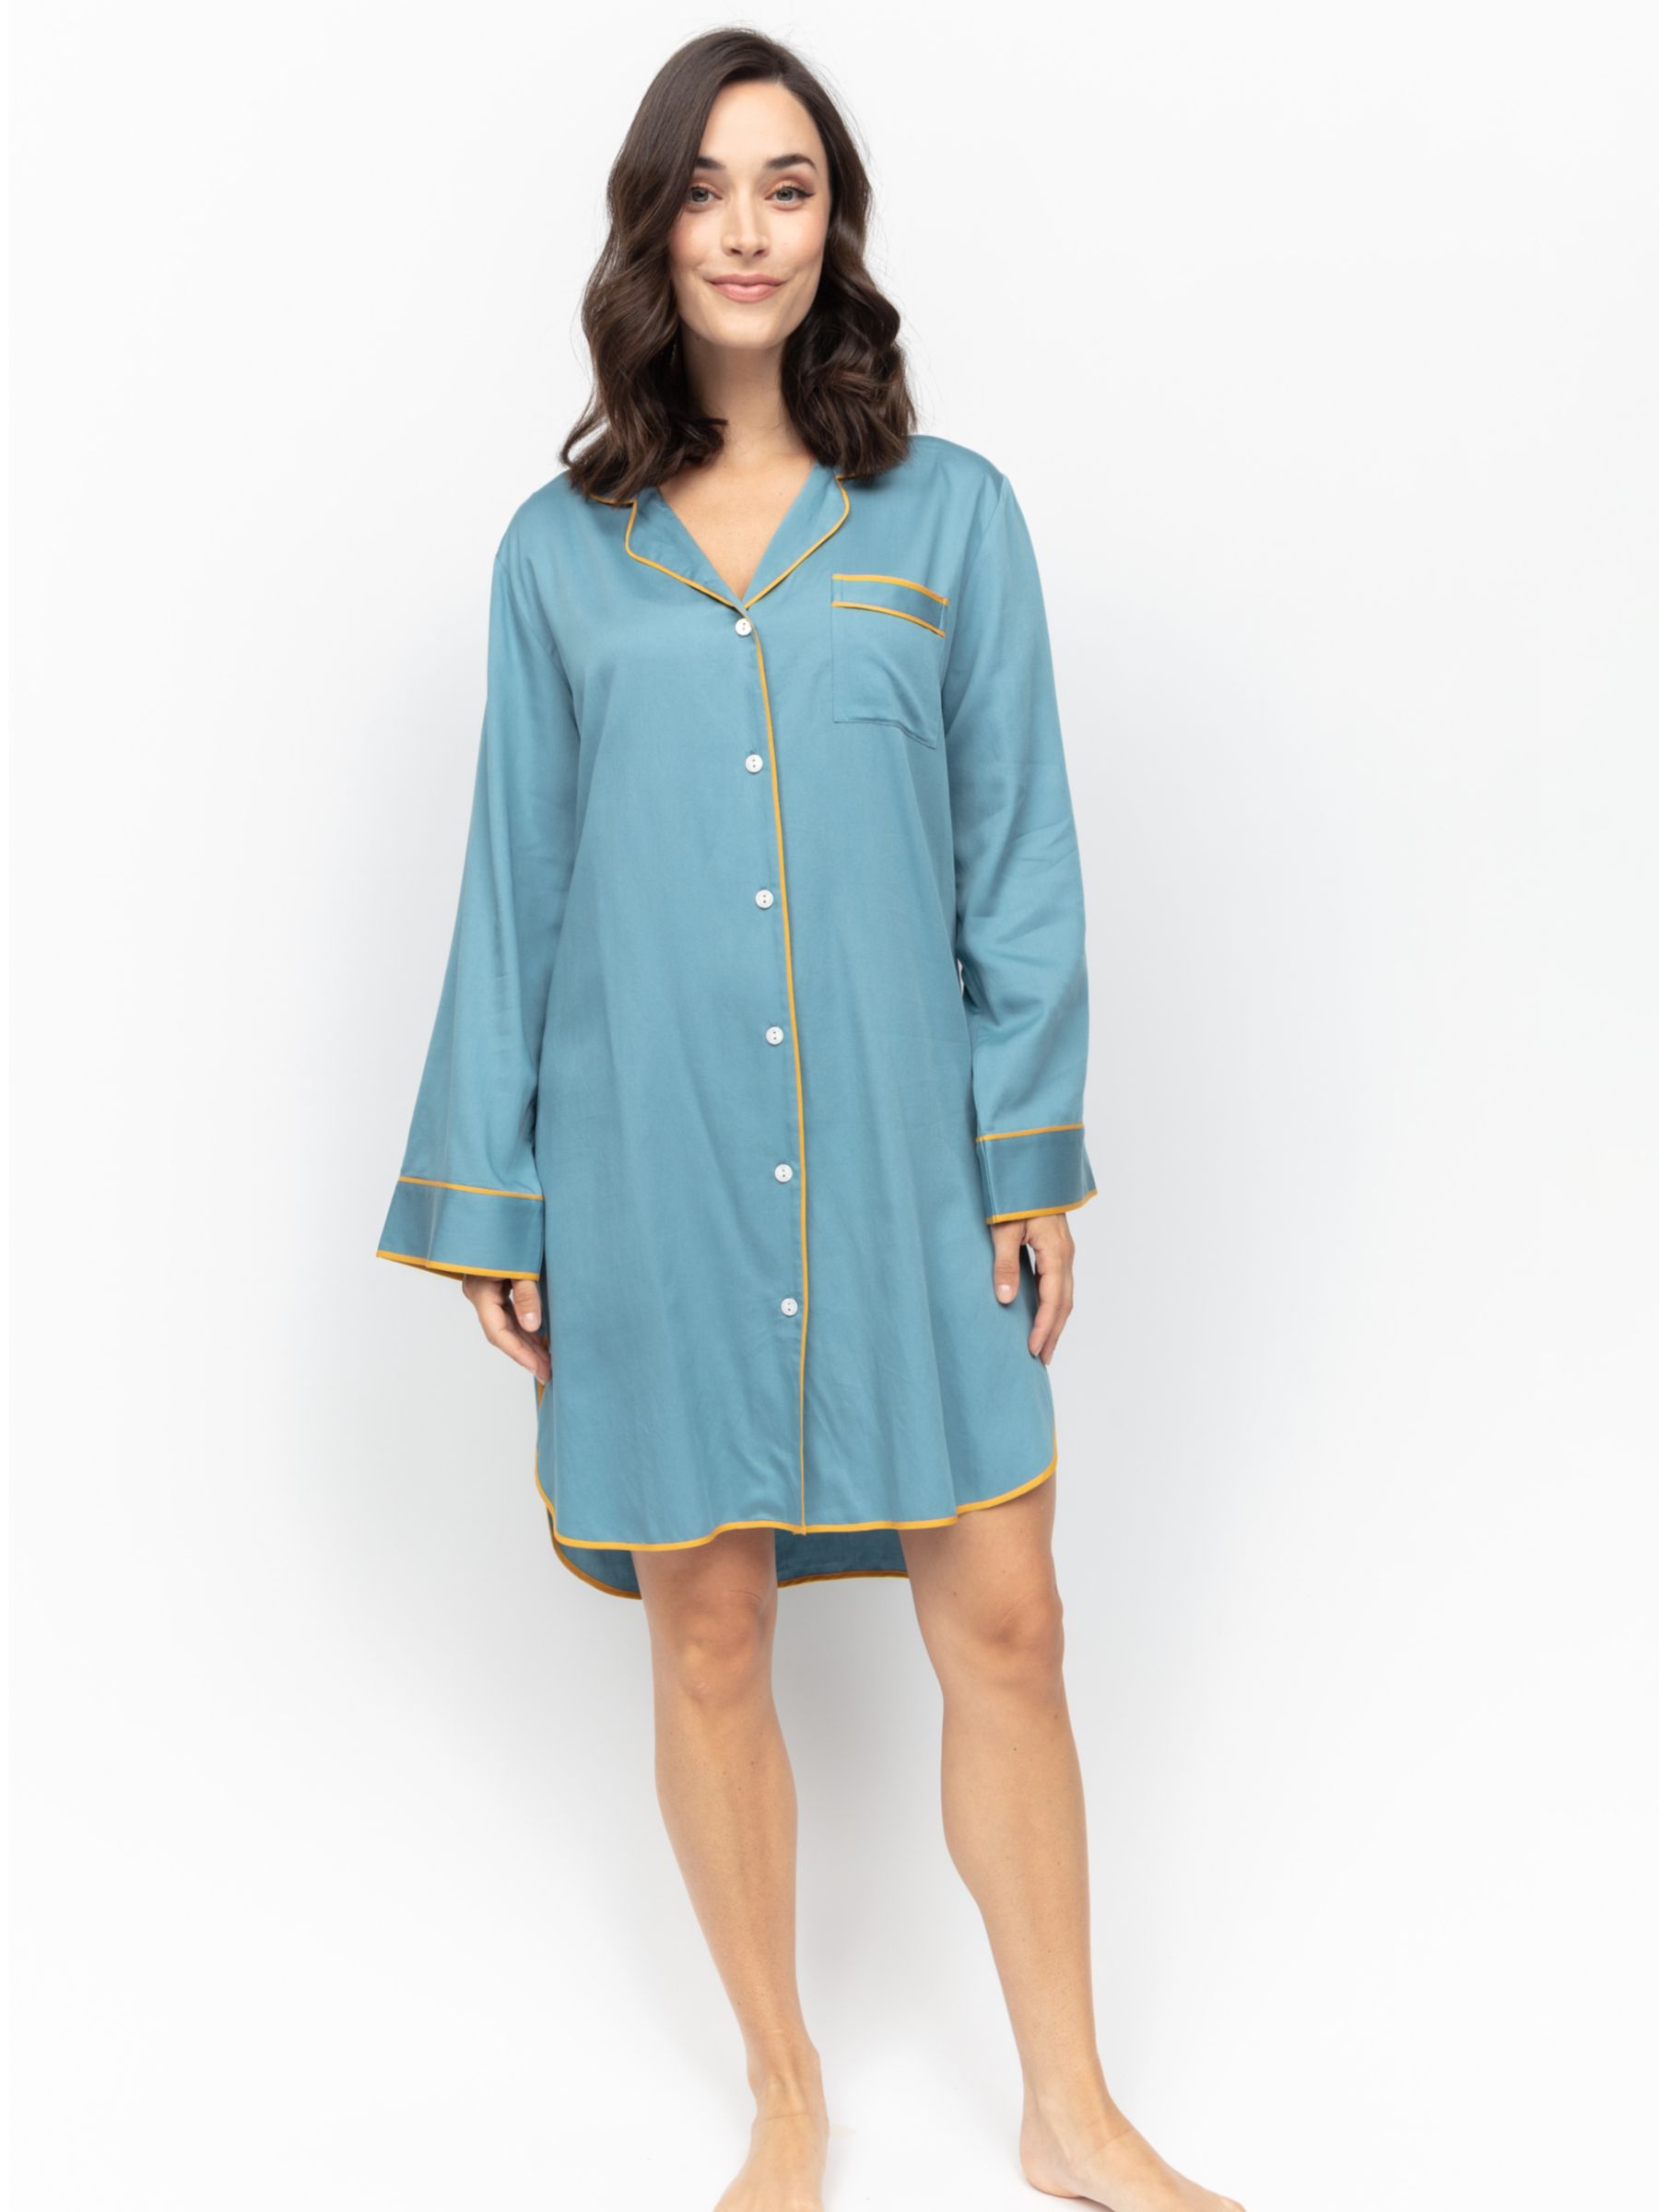 Buy Fable & Eve Greenwich Nightshirt, Cerulean Blue Online at johnlewis.com